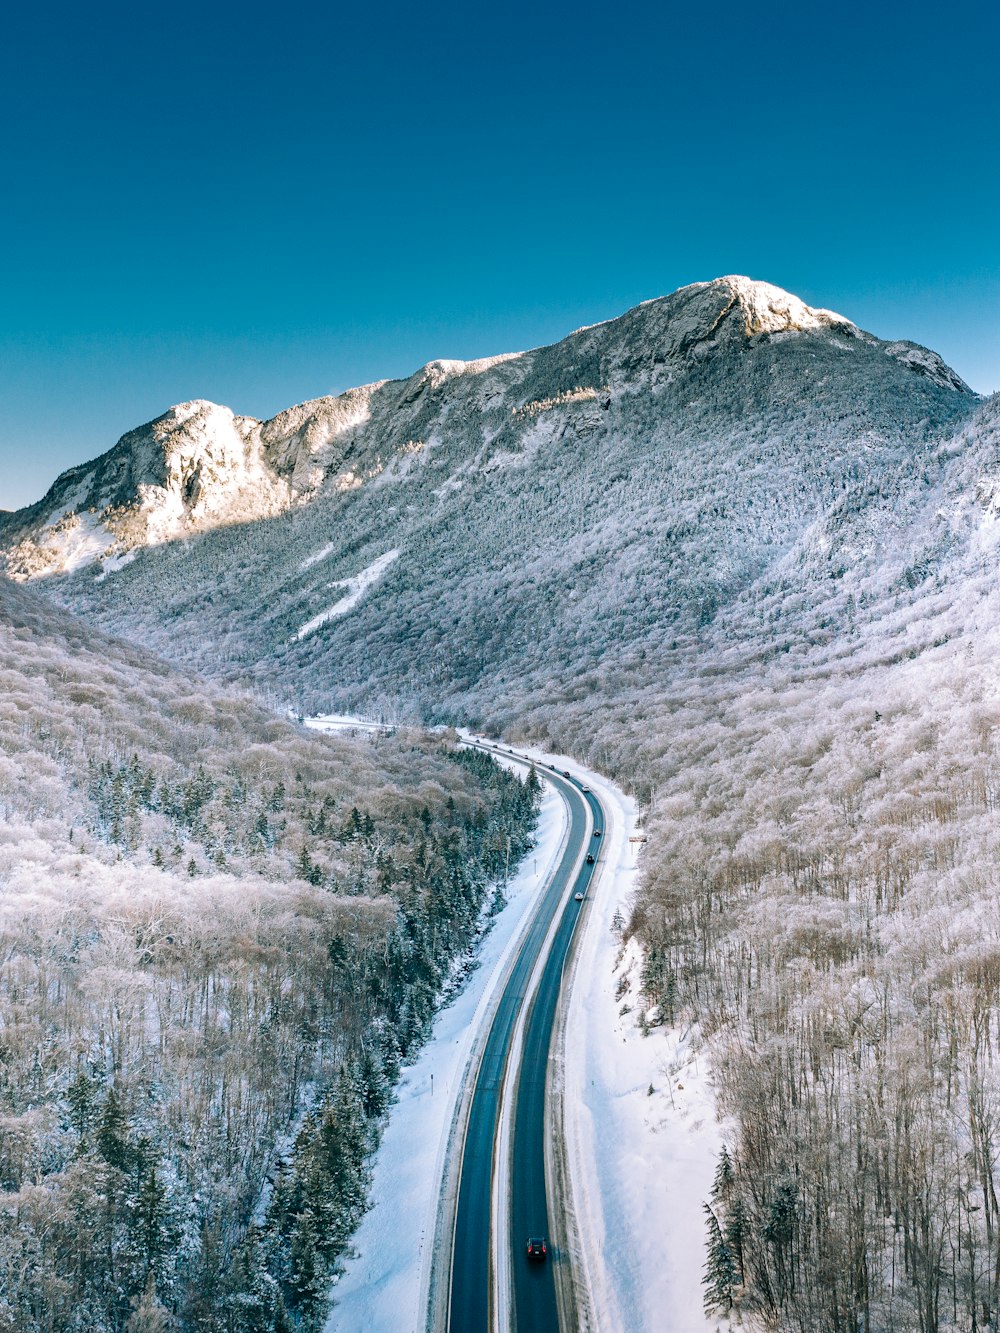 snow covered road near mountain under blue sky during daytime